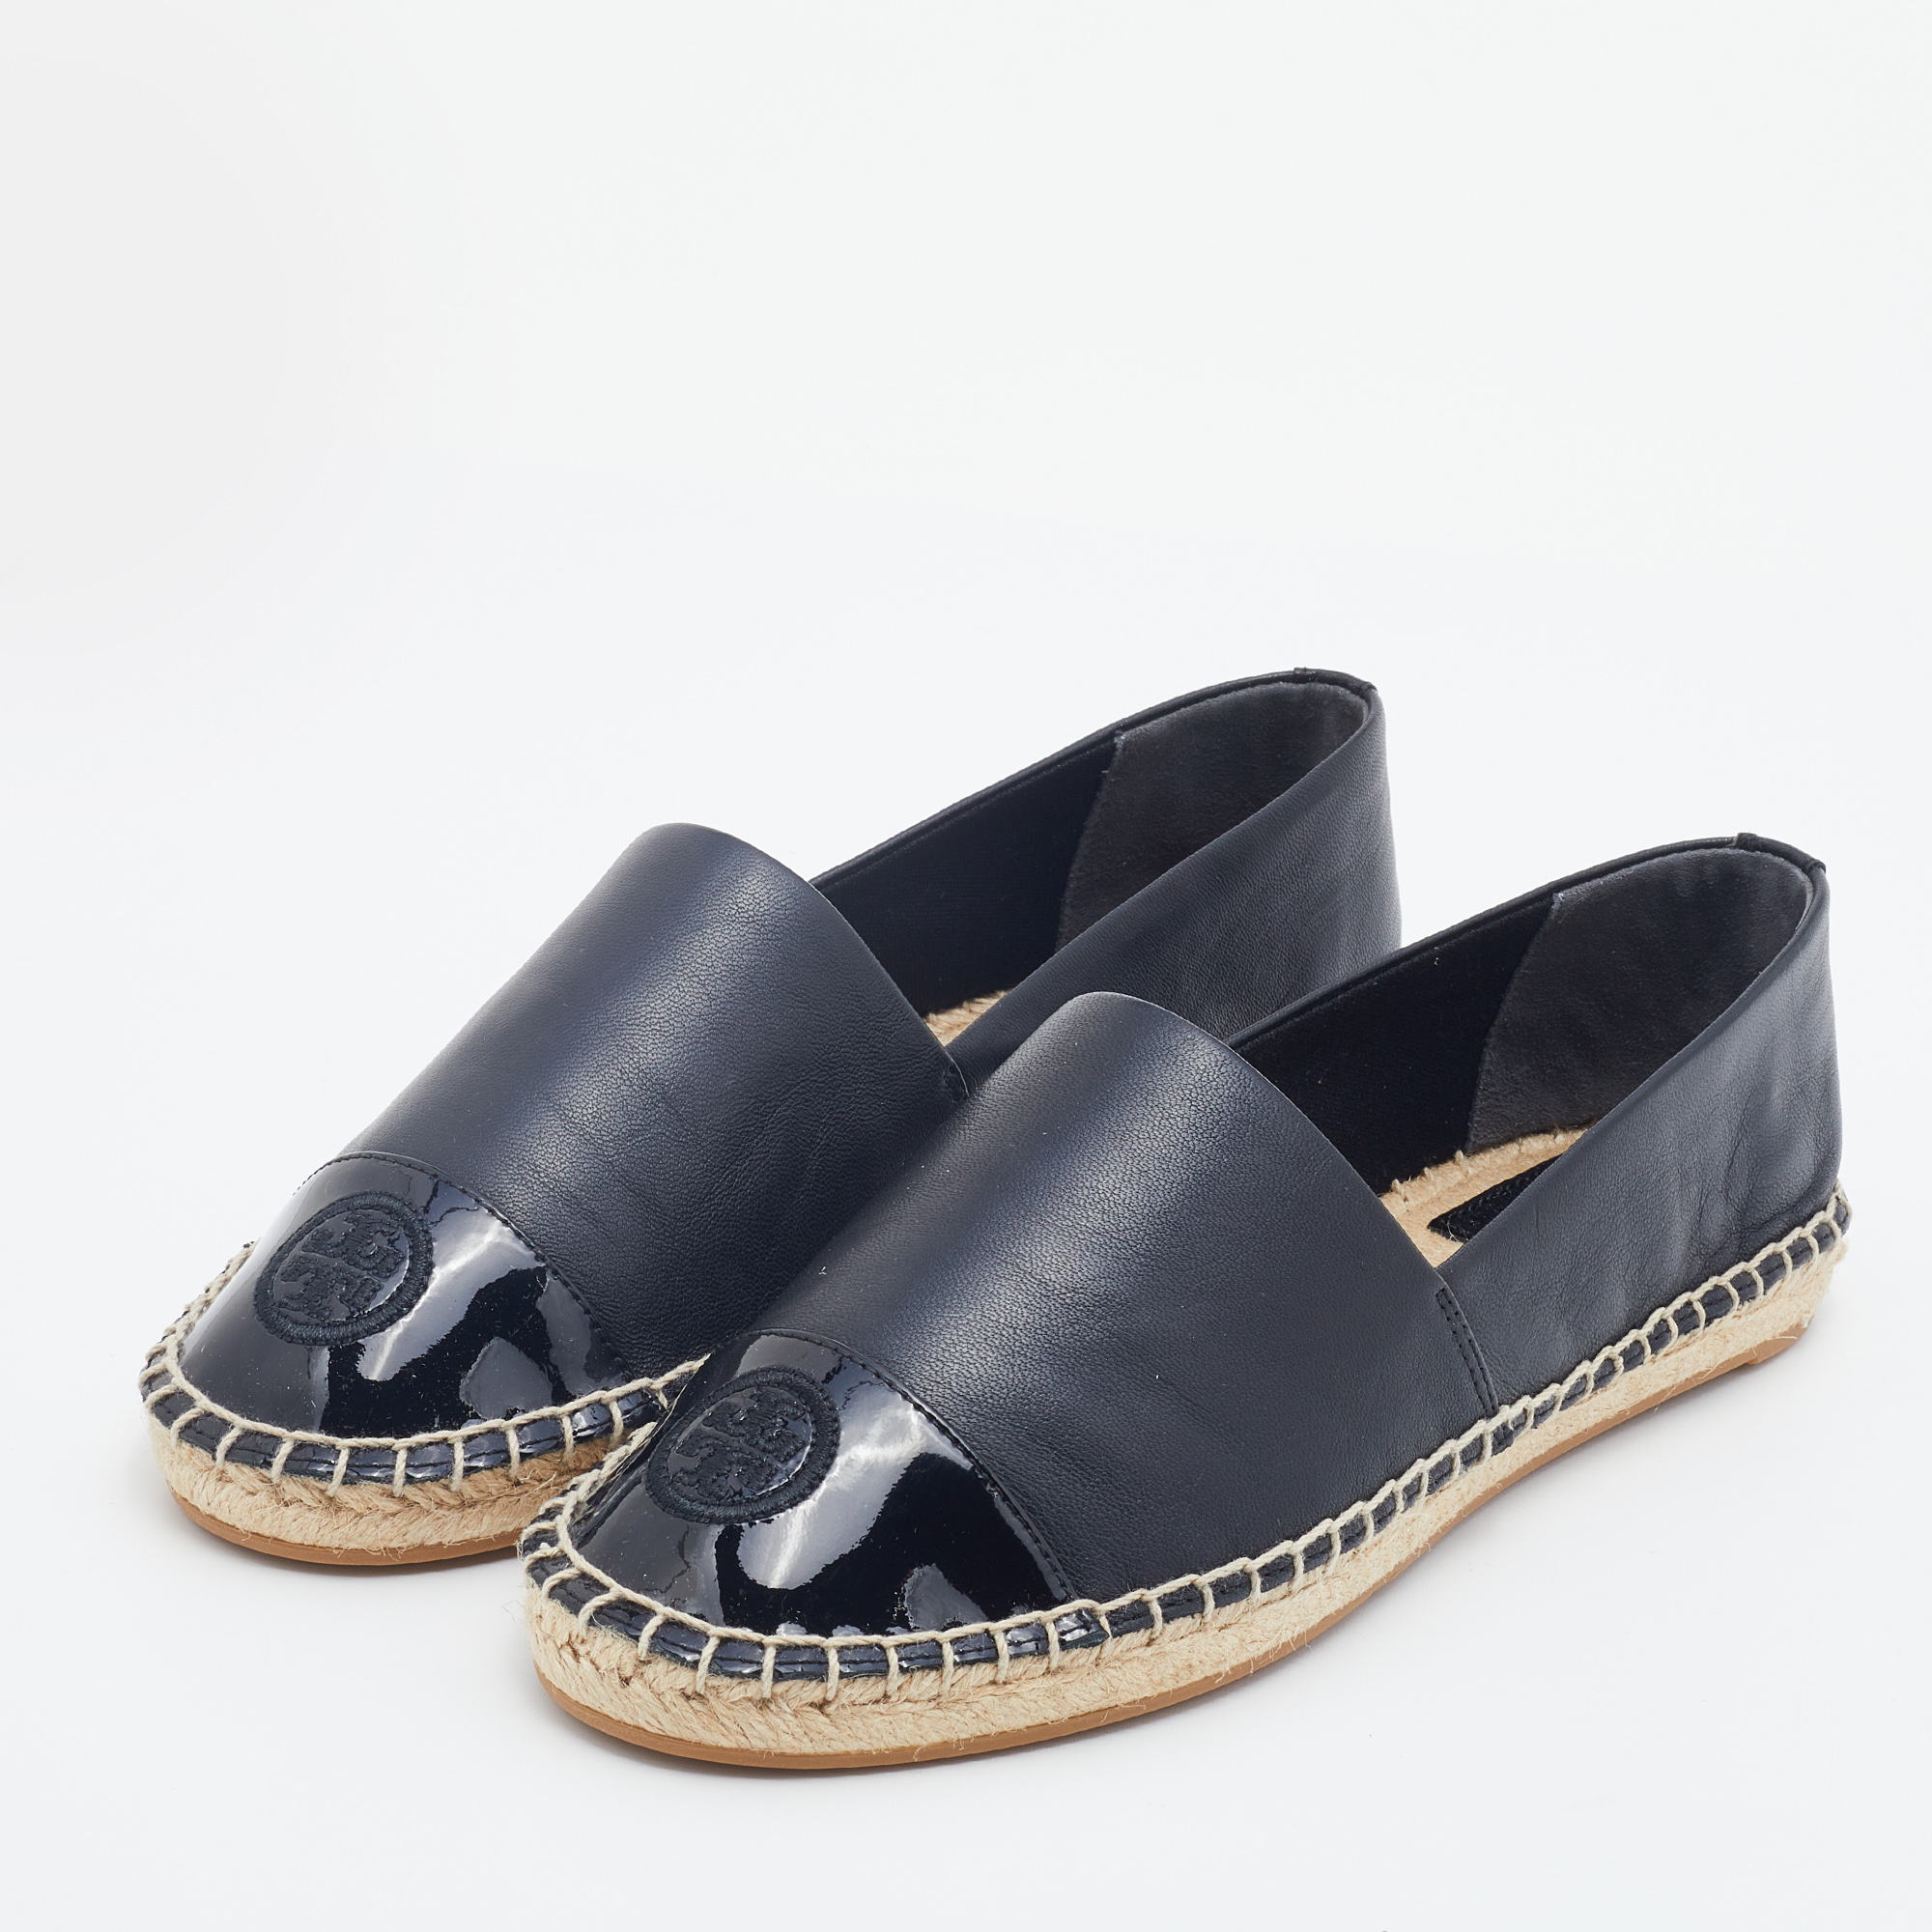 

Tory Burch Black Patent and Leather Flat Espadrilles Size